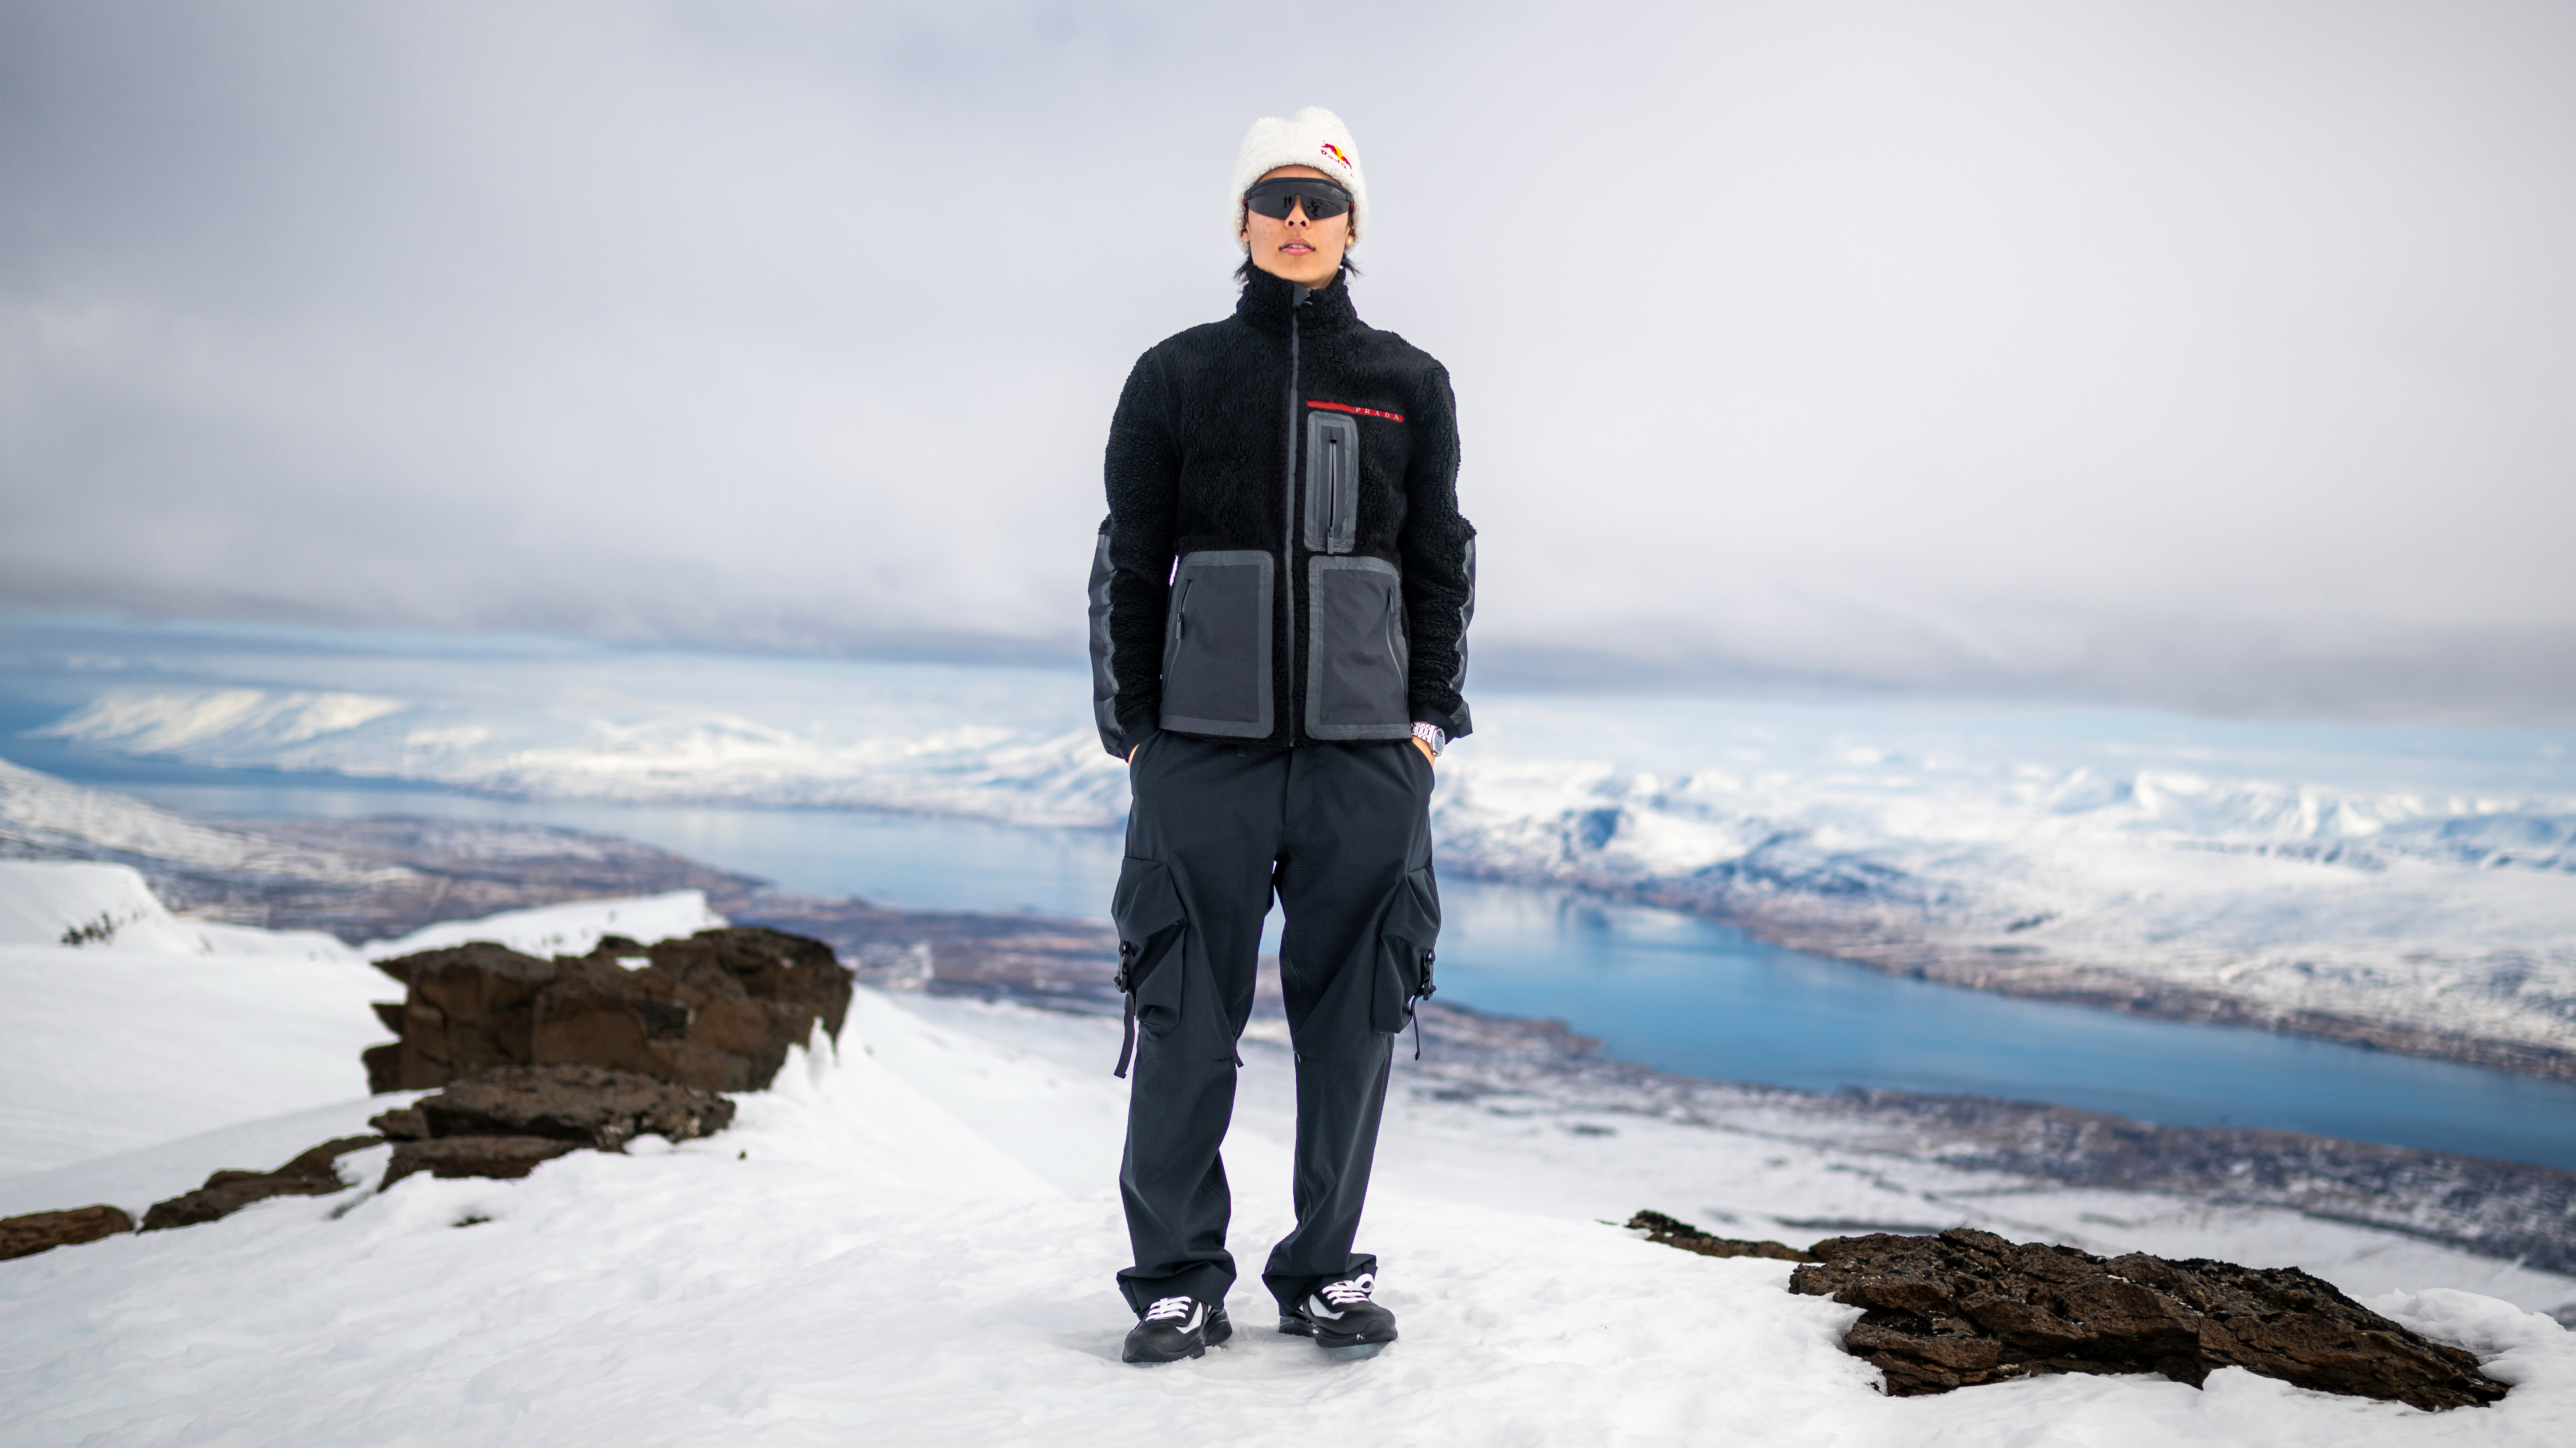 Person stands on snowy overlook in layered outdoor wear with visor cap, against mountainous backdrop